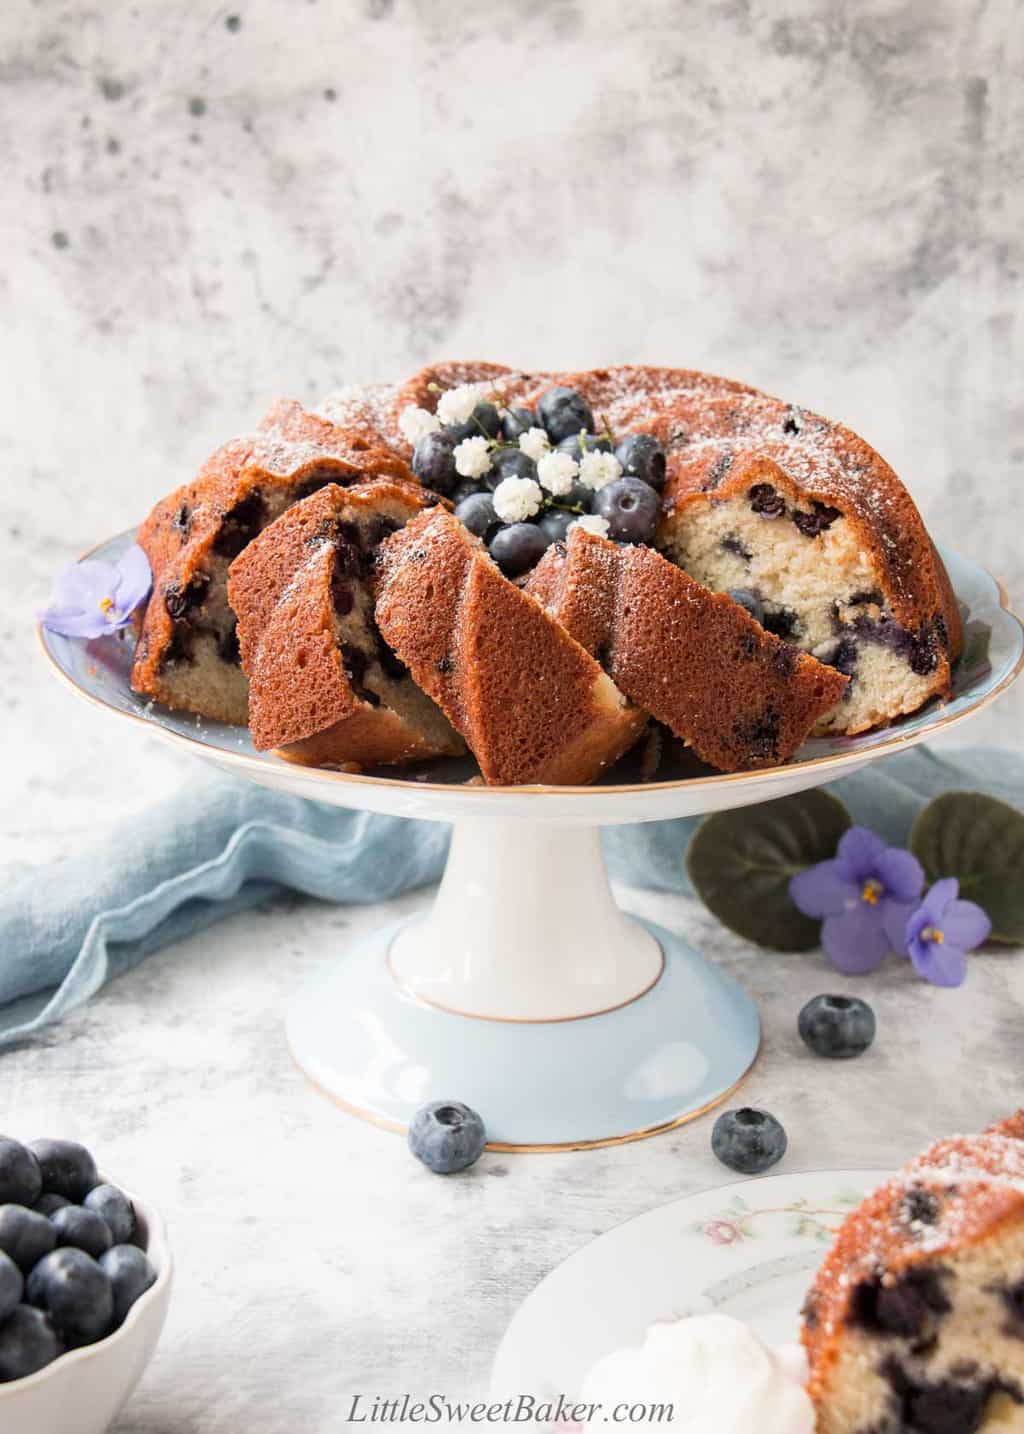 Share more than 68 cake recipes using blueberries best - in.daotaonec